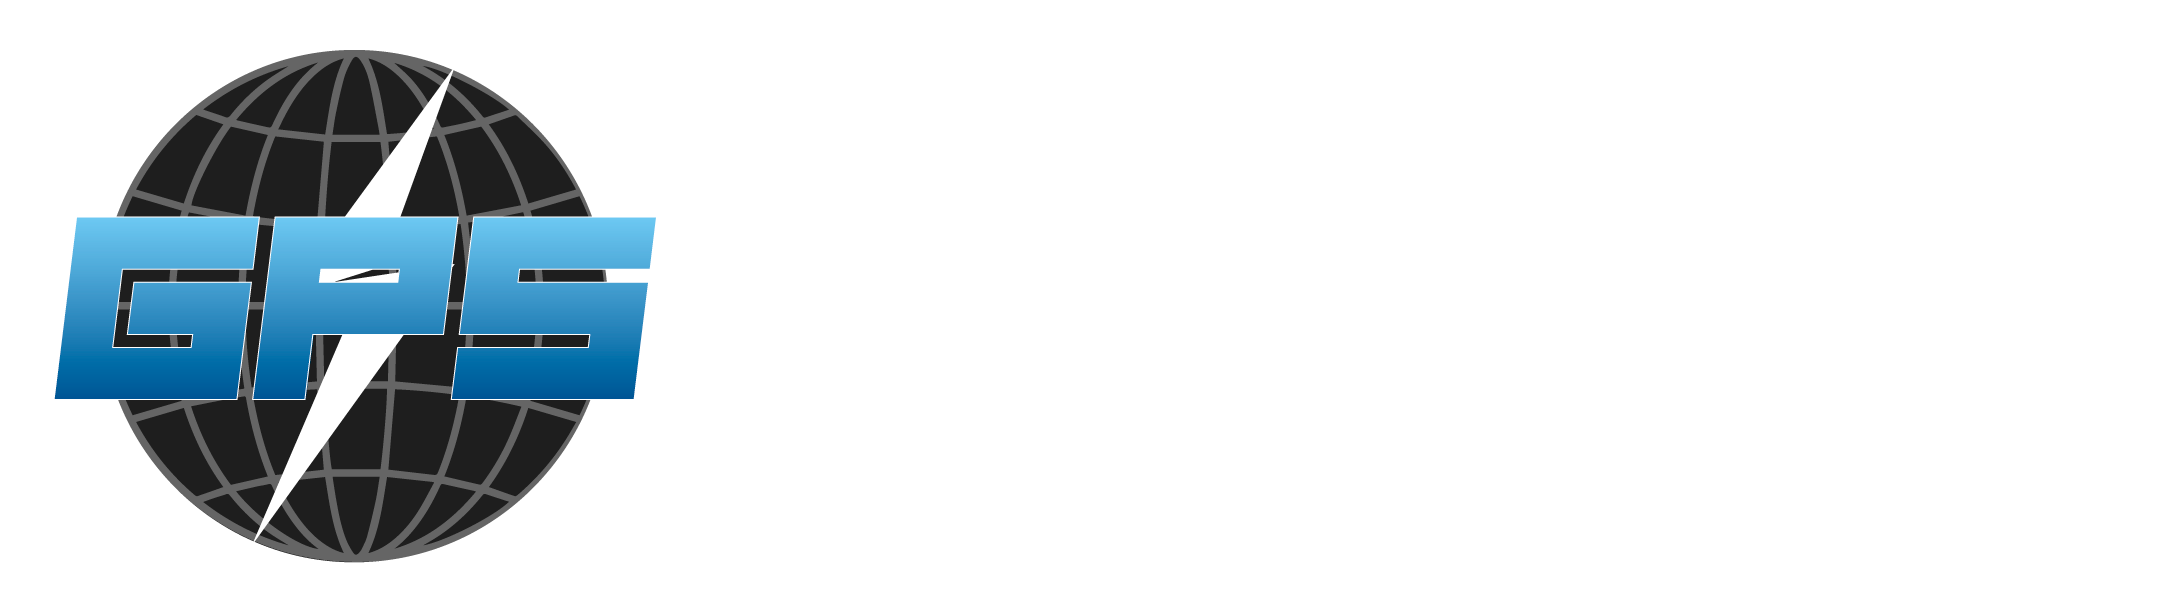 GPS Fire Safety Systems